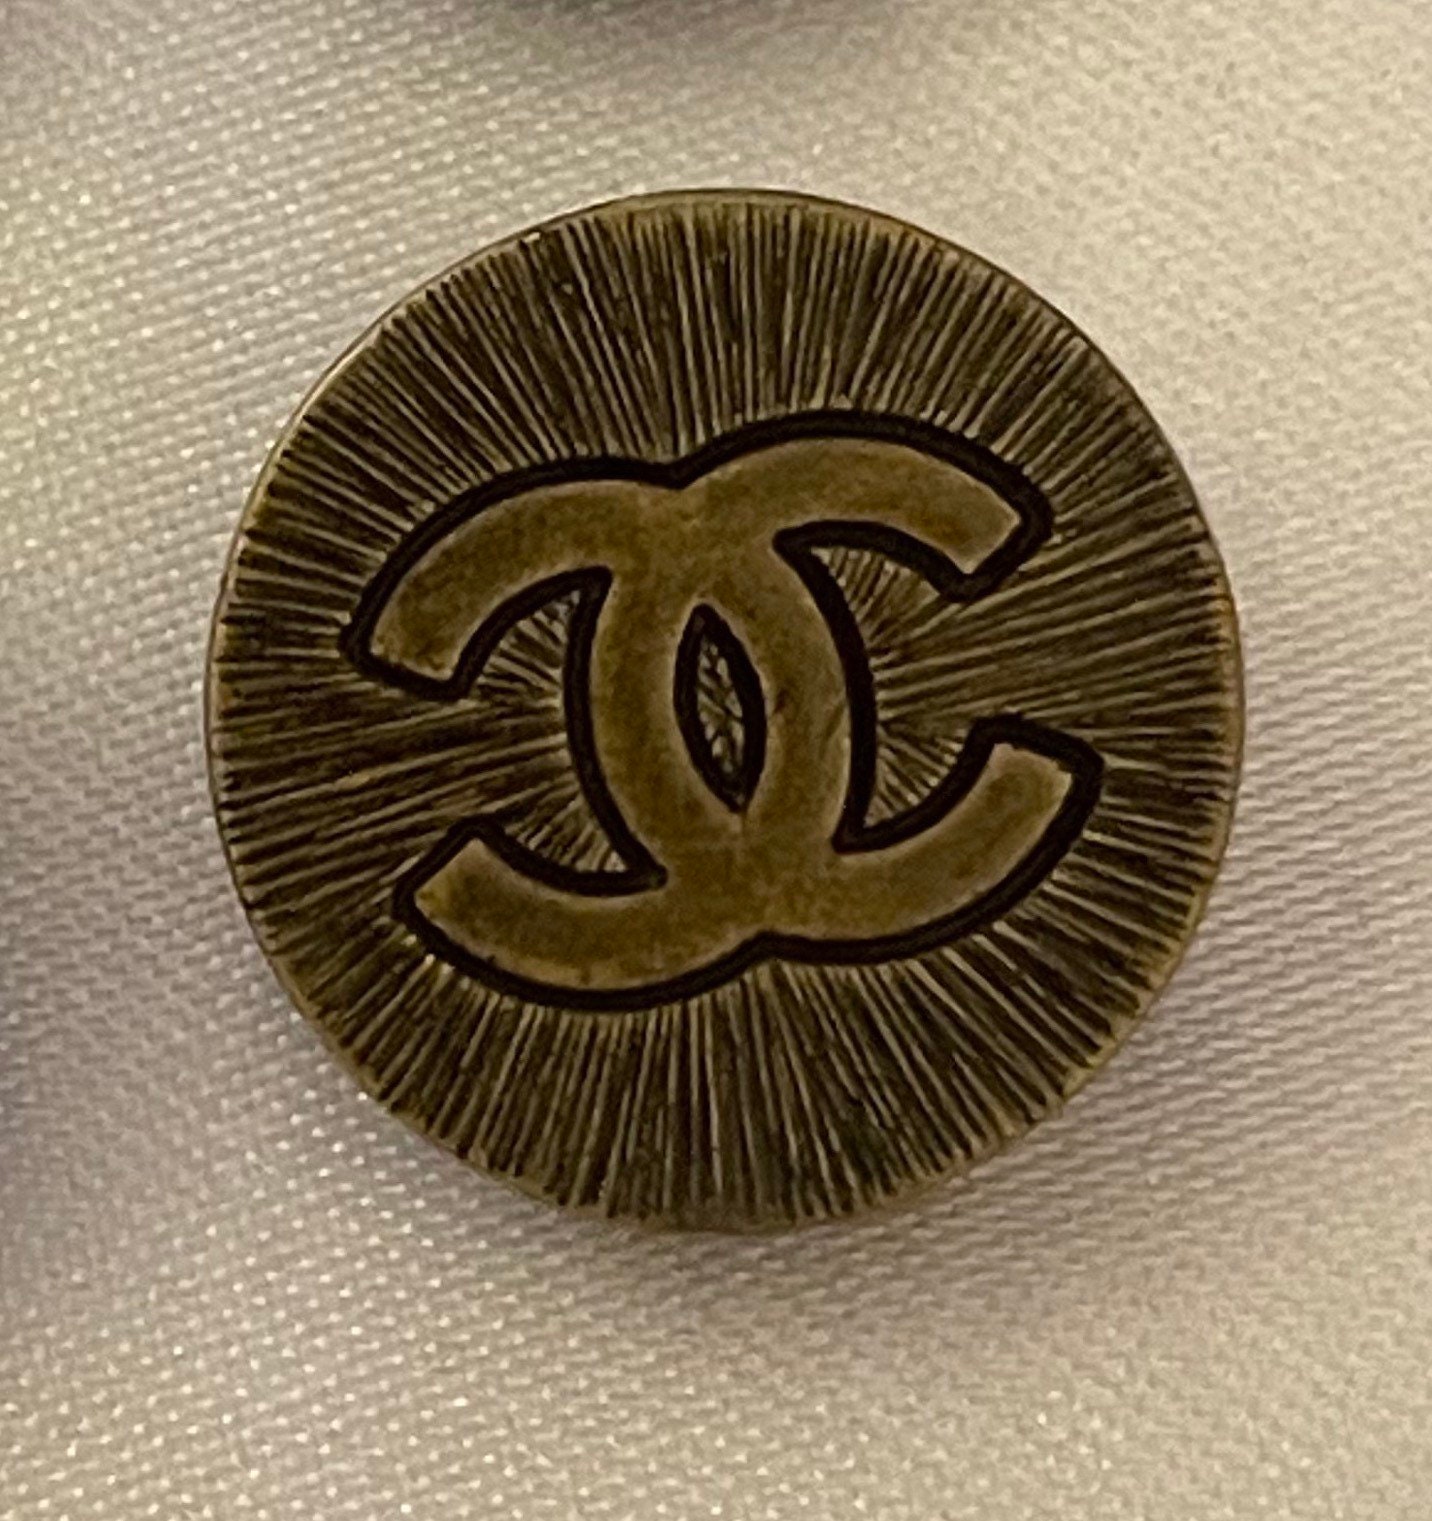 4 Vintage Buttons Chanel 2000s 